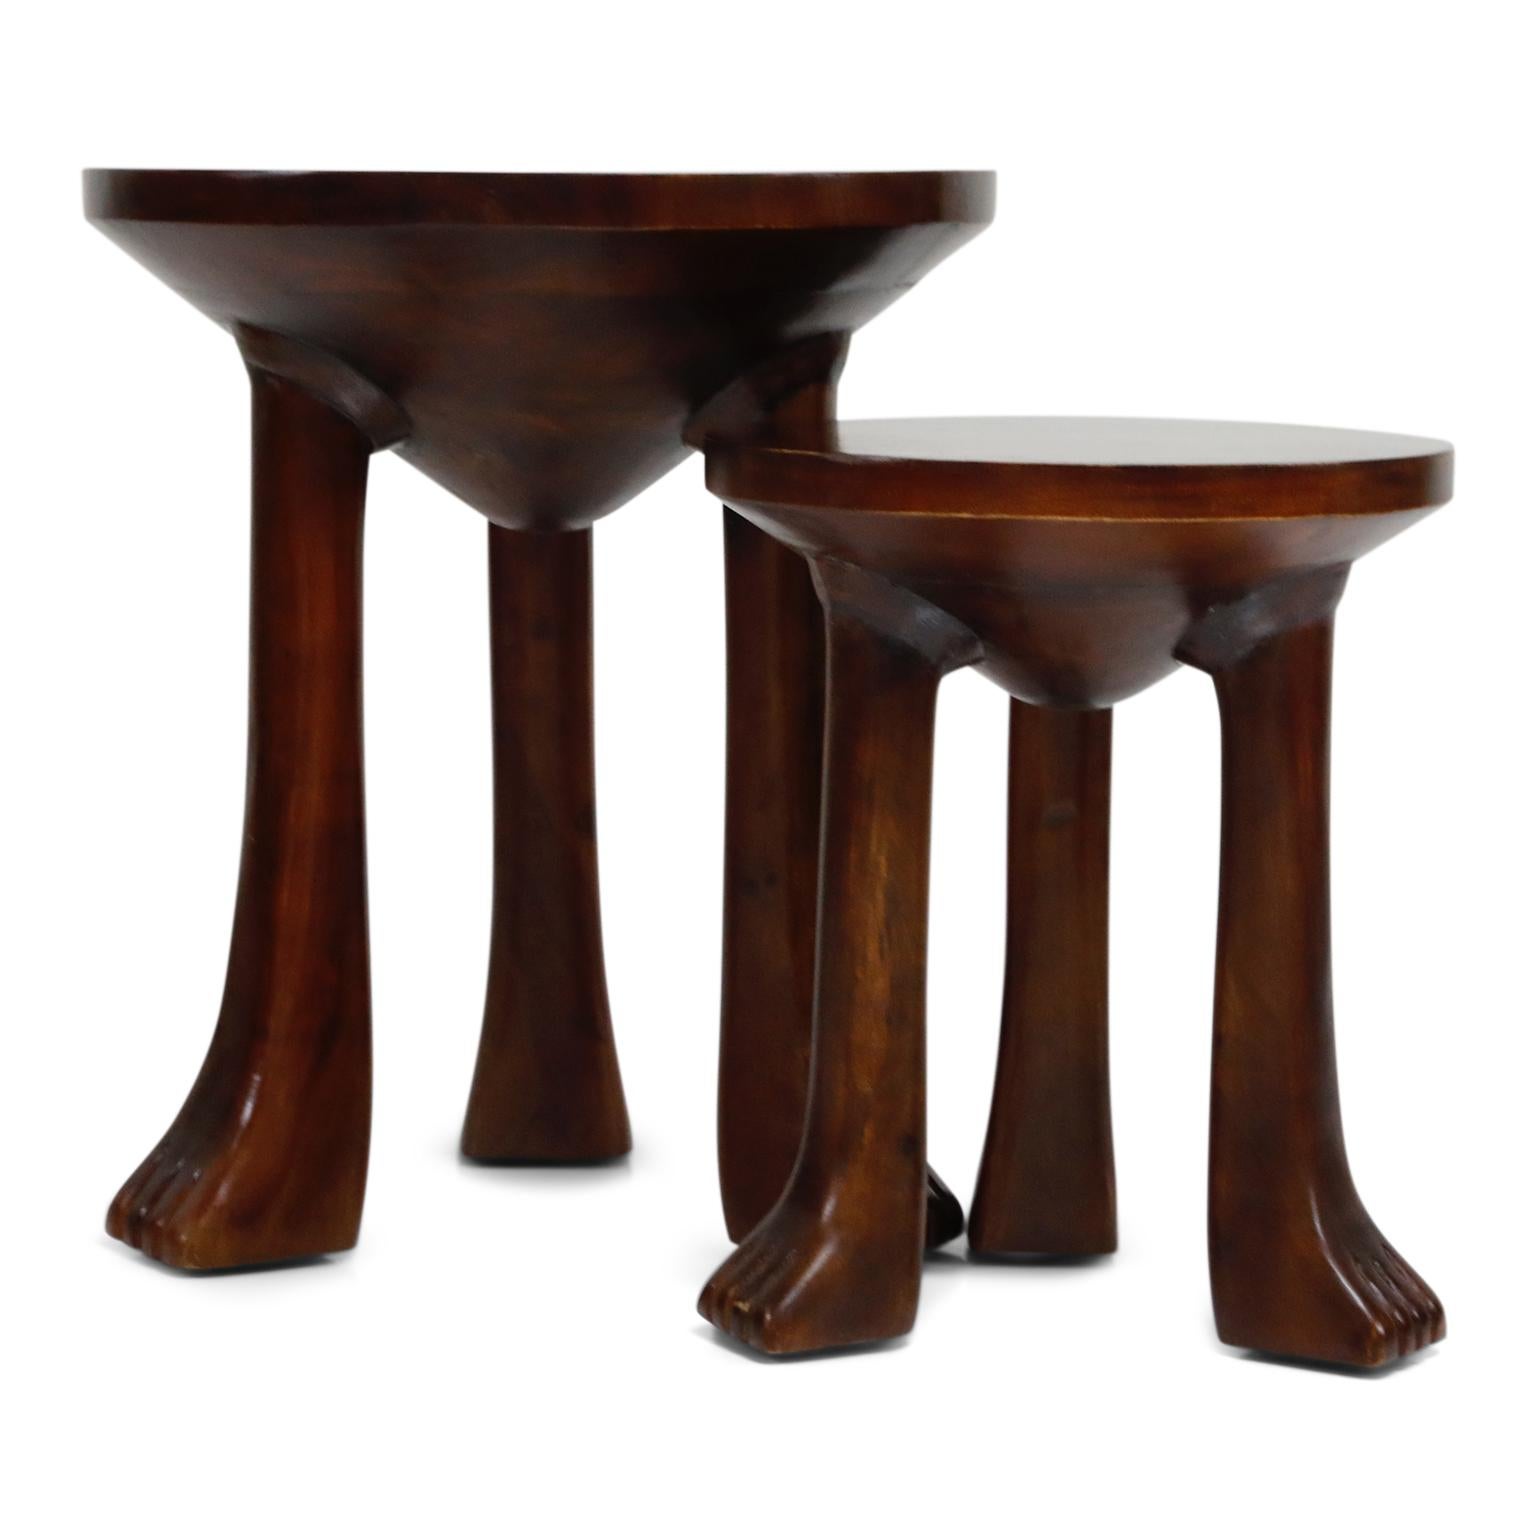 Carved Teak Three-Legged Lionfoot Side Tables in the Style of John Dickinson 4